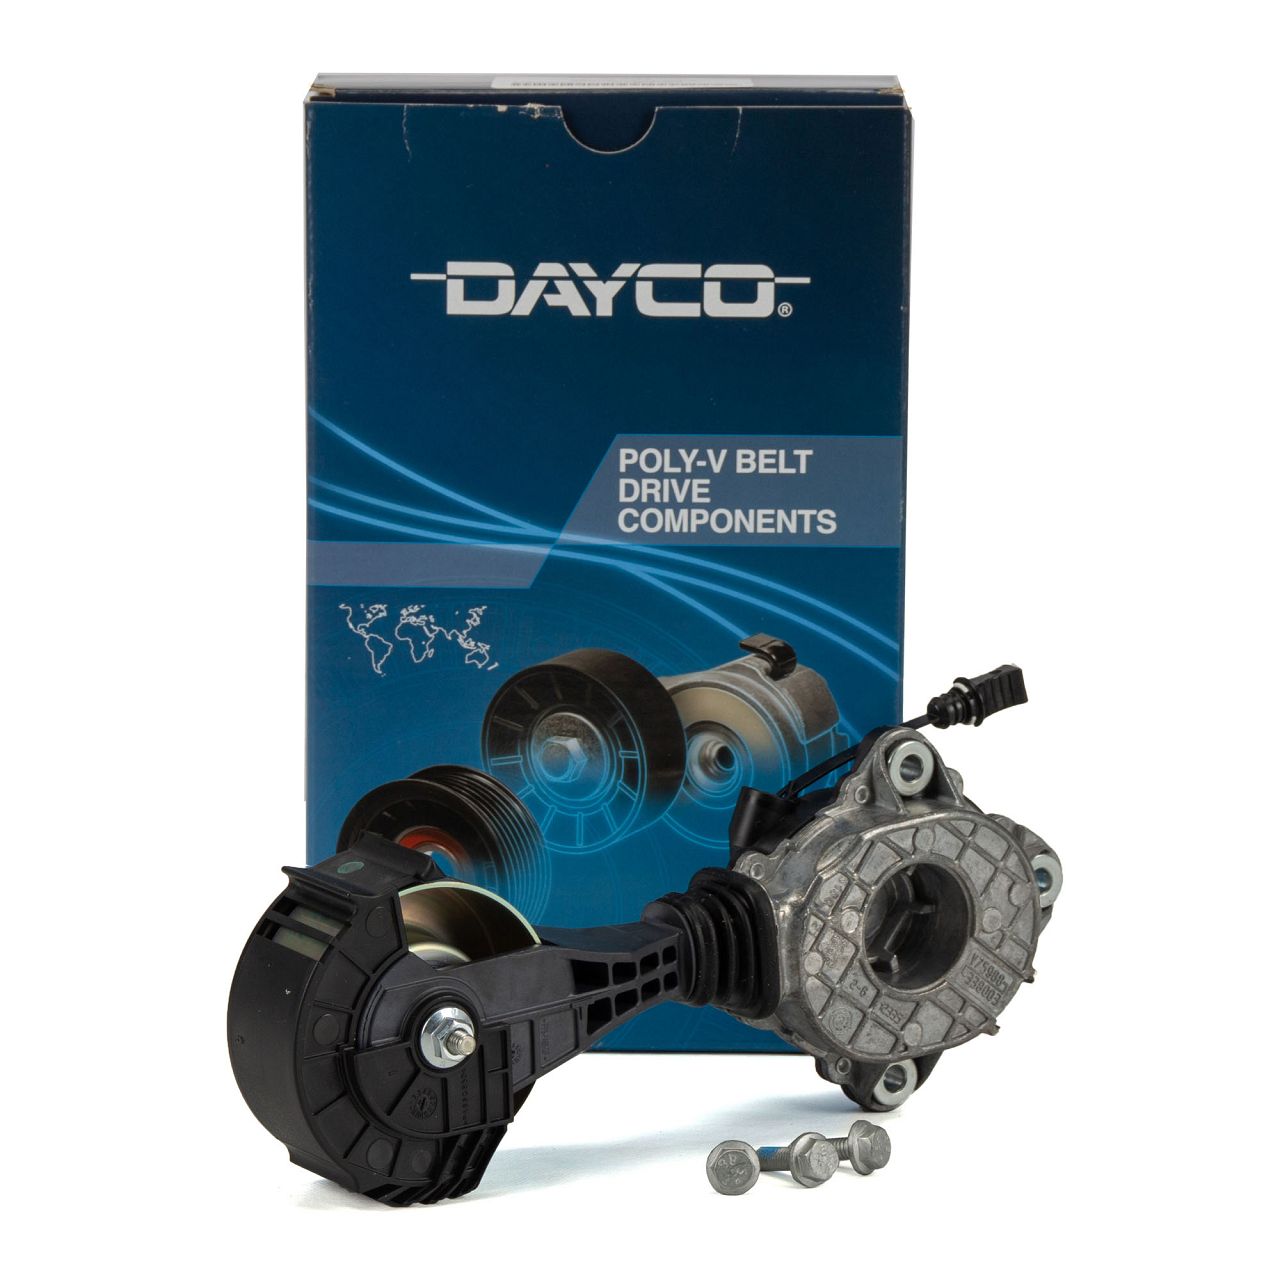 Dayco belt tensioner for PSA Groupe 1204.56 with cardboard box